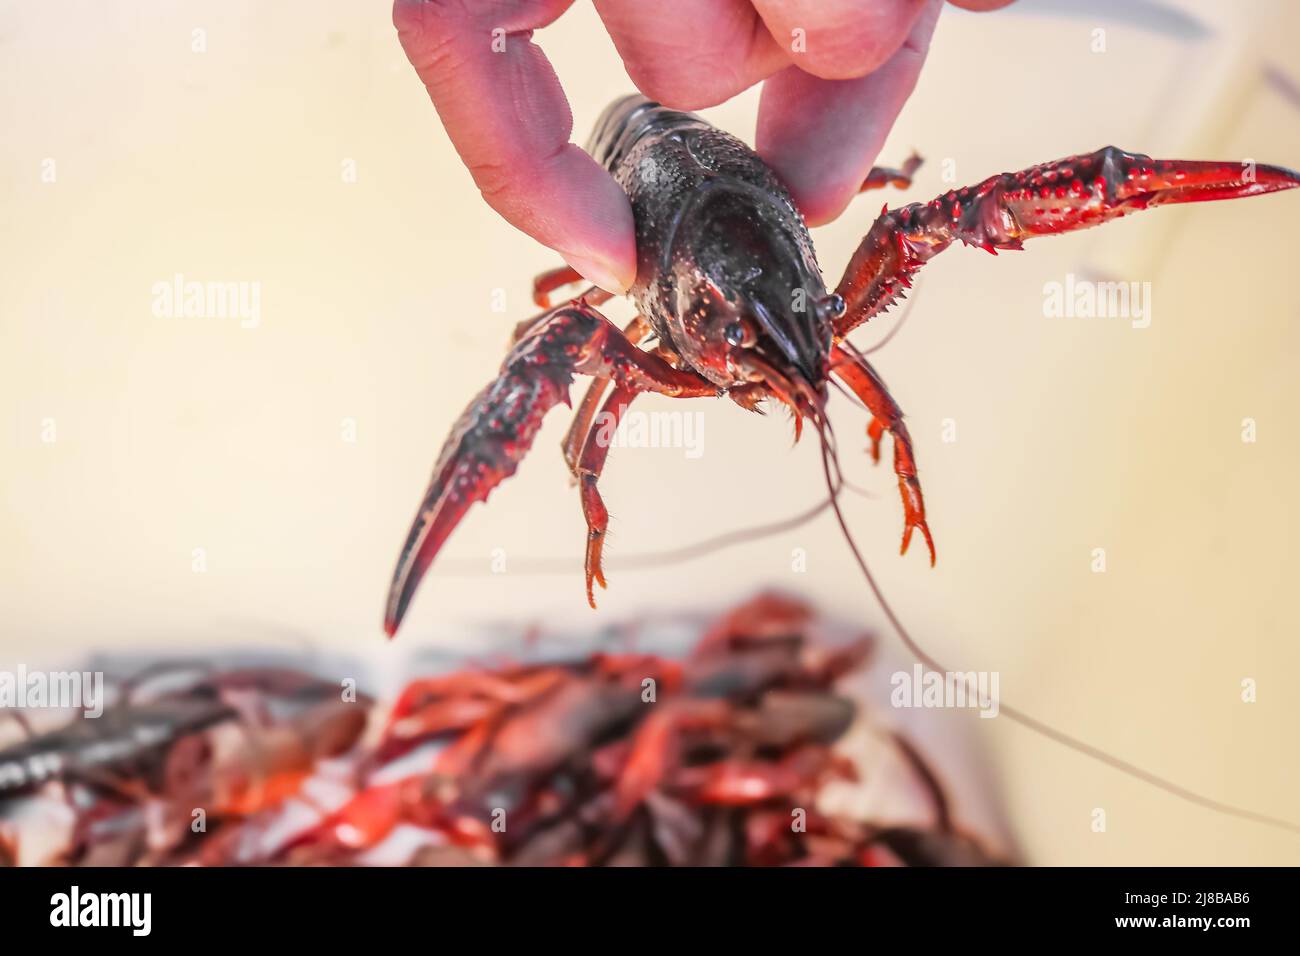 Live crawdad with pinchers stretched out held up by hand above blurred crayfish below - selective focus Stock Photo